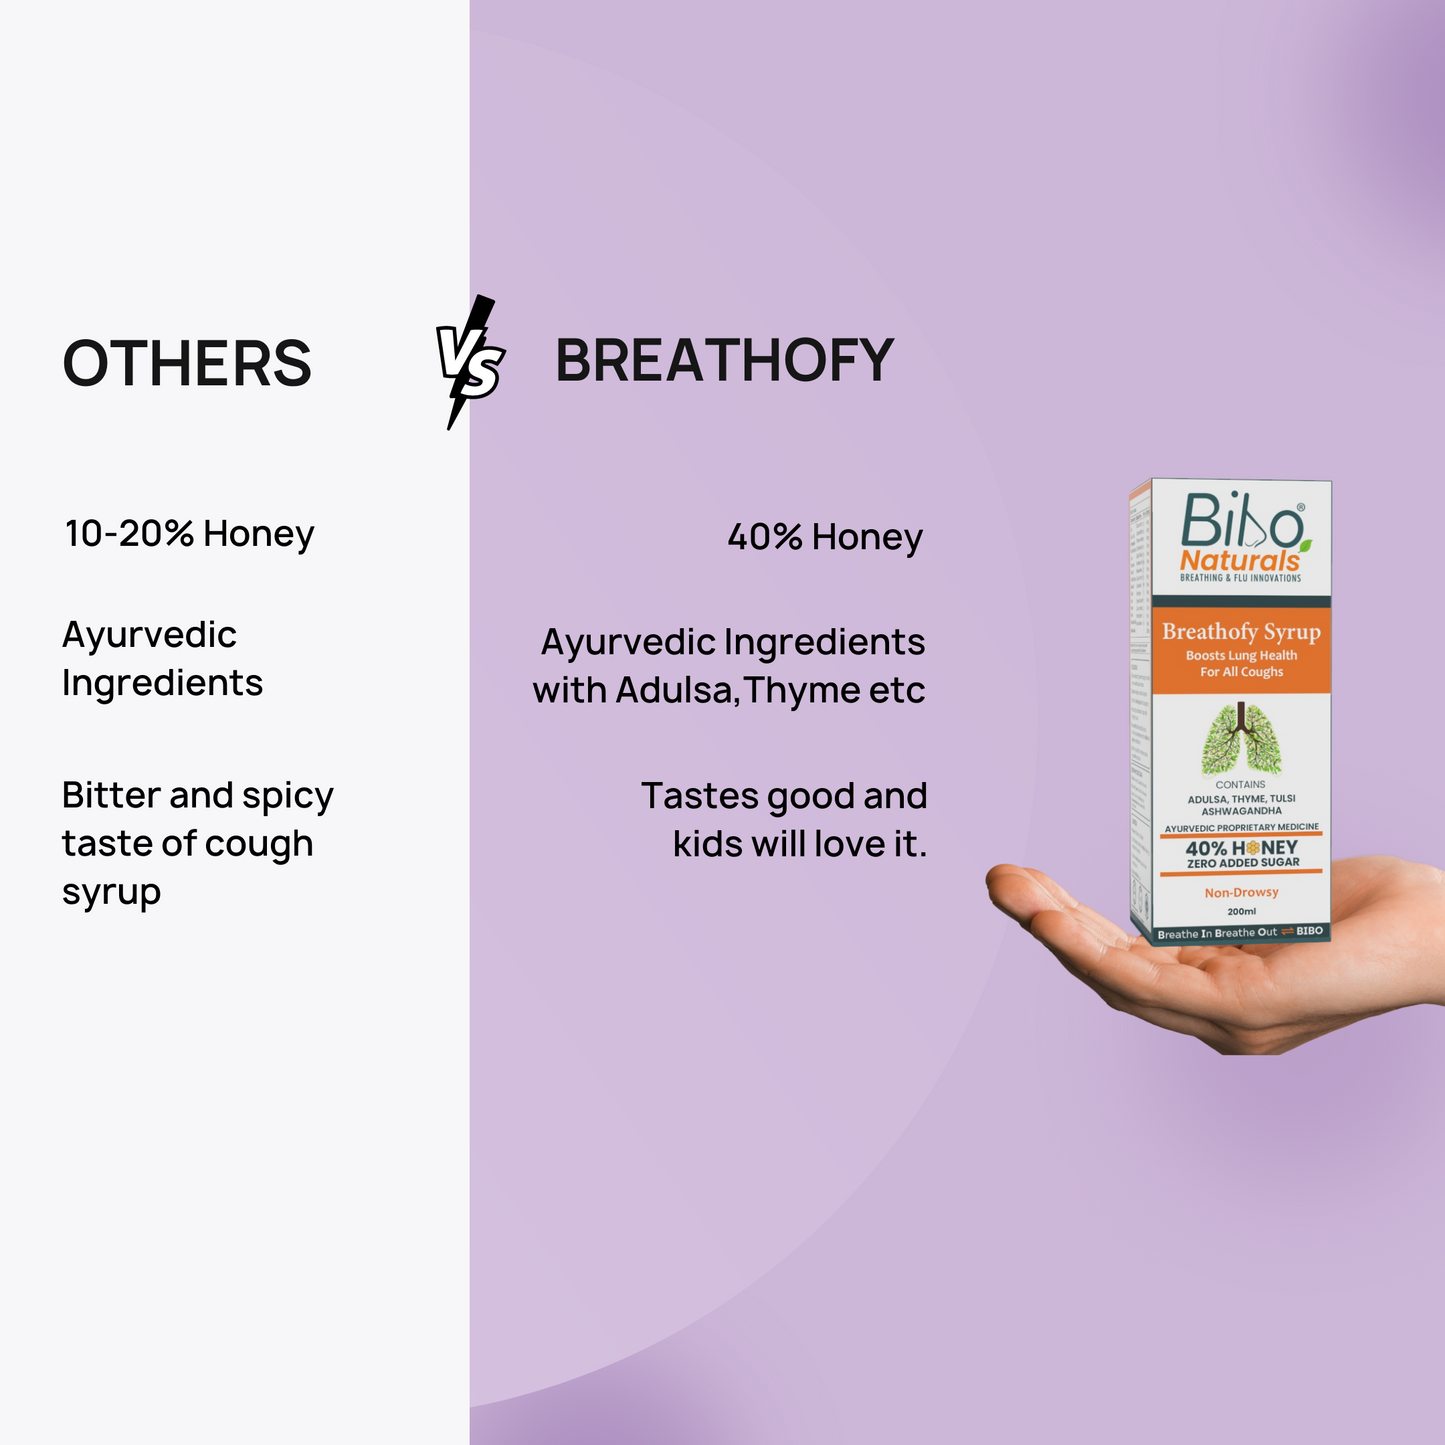 Breathofy Syrup | Lung Health | For All Coughs | 40% Honey | 200ml